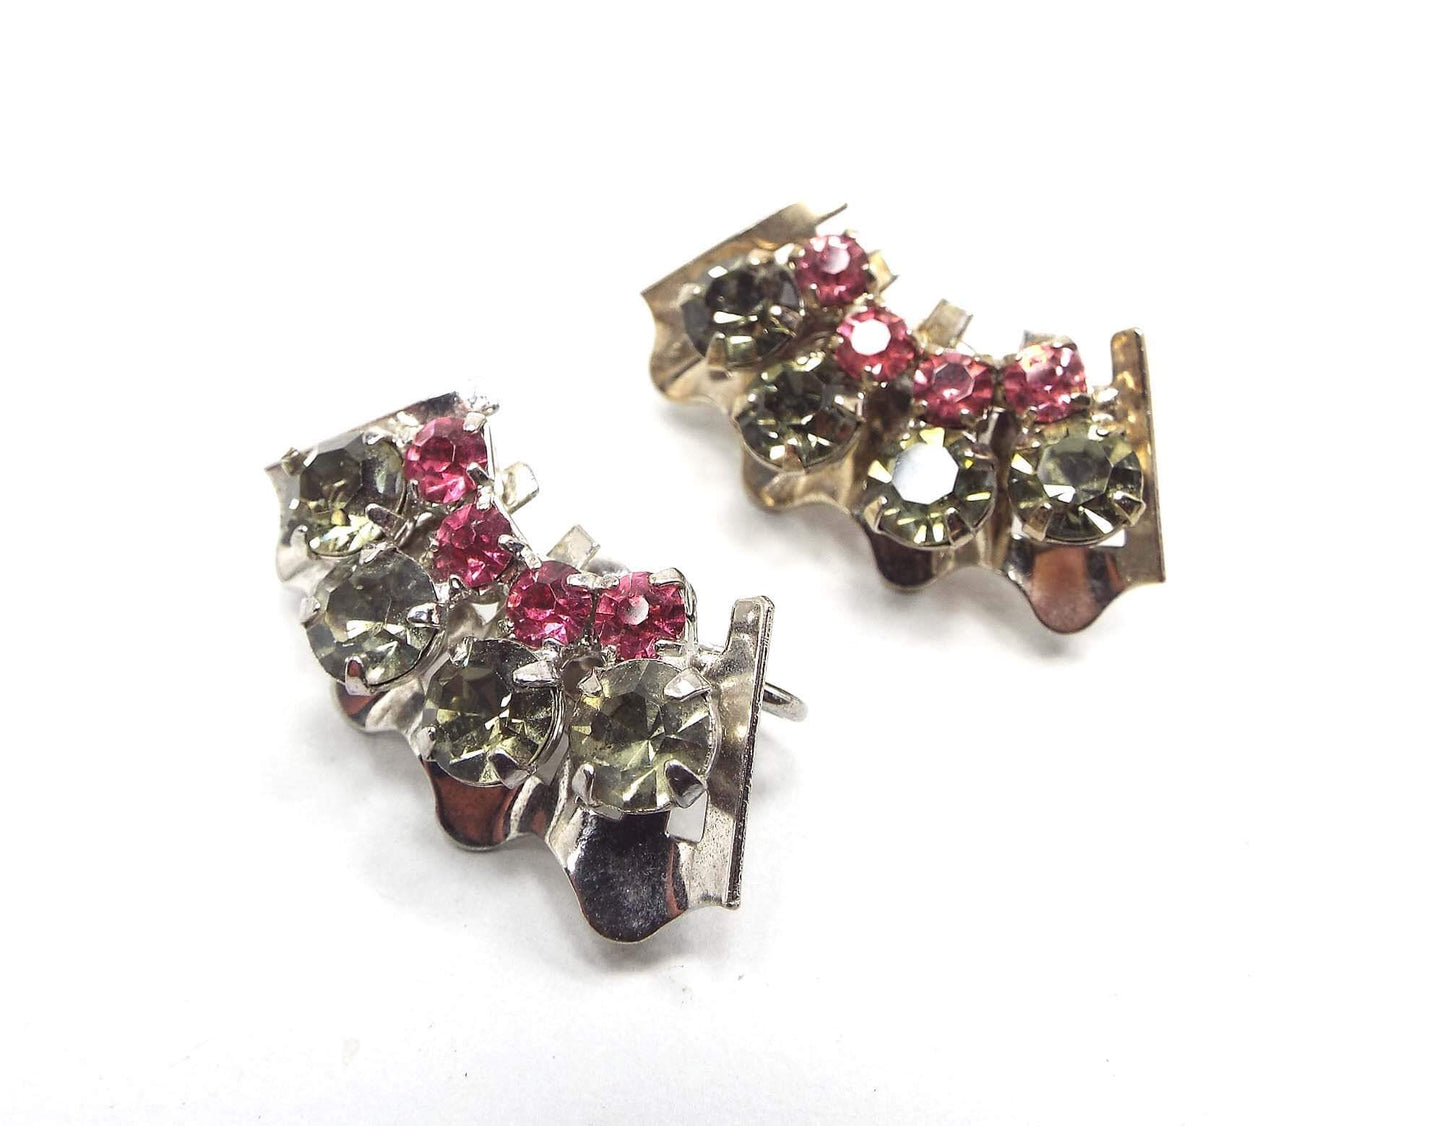 Vintage Pink and Smoky Rhinestone Clip on Earrings